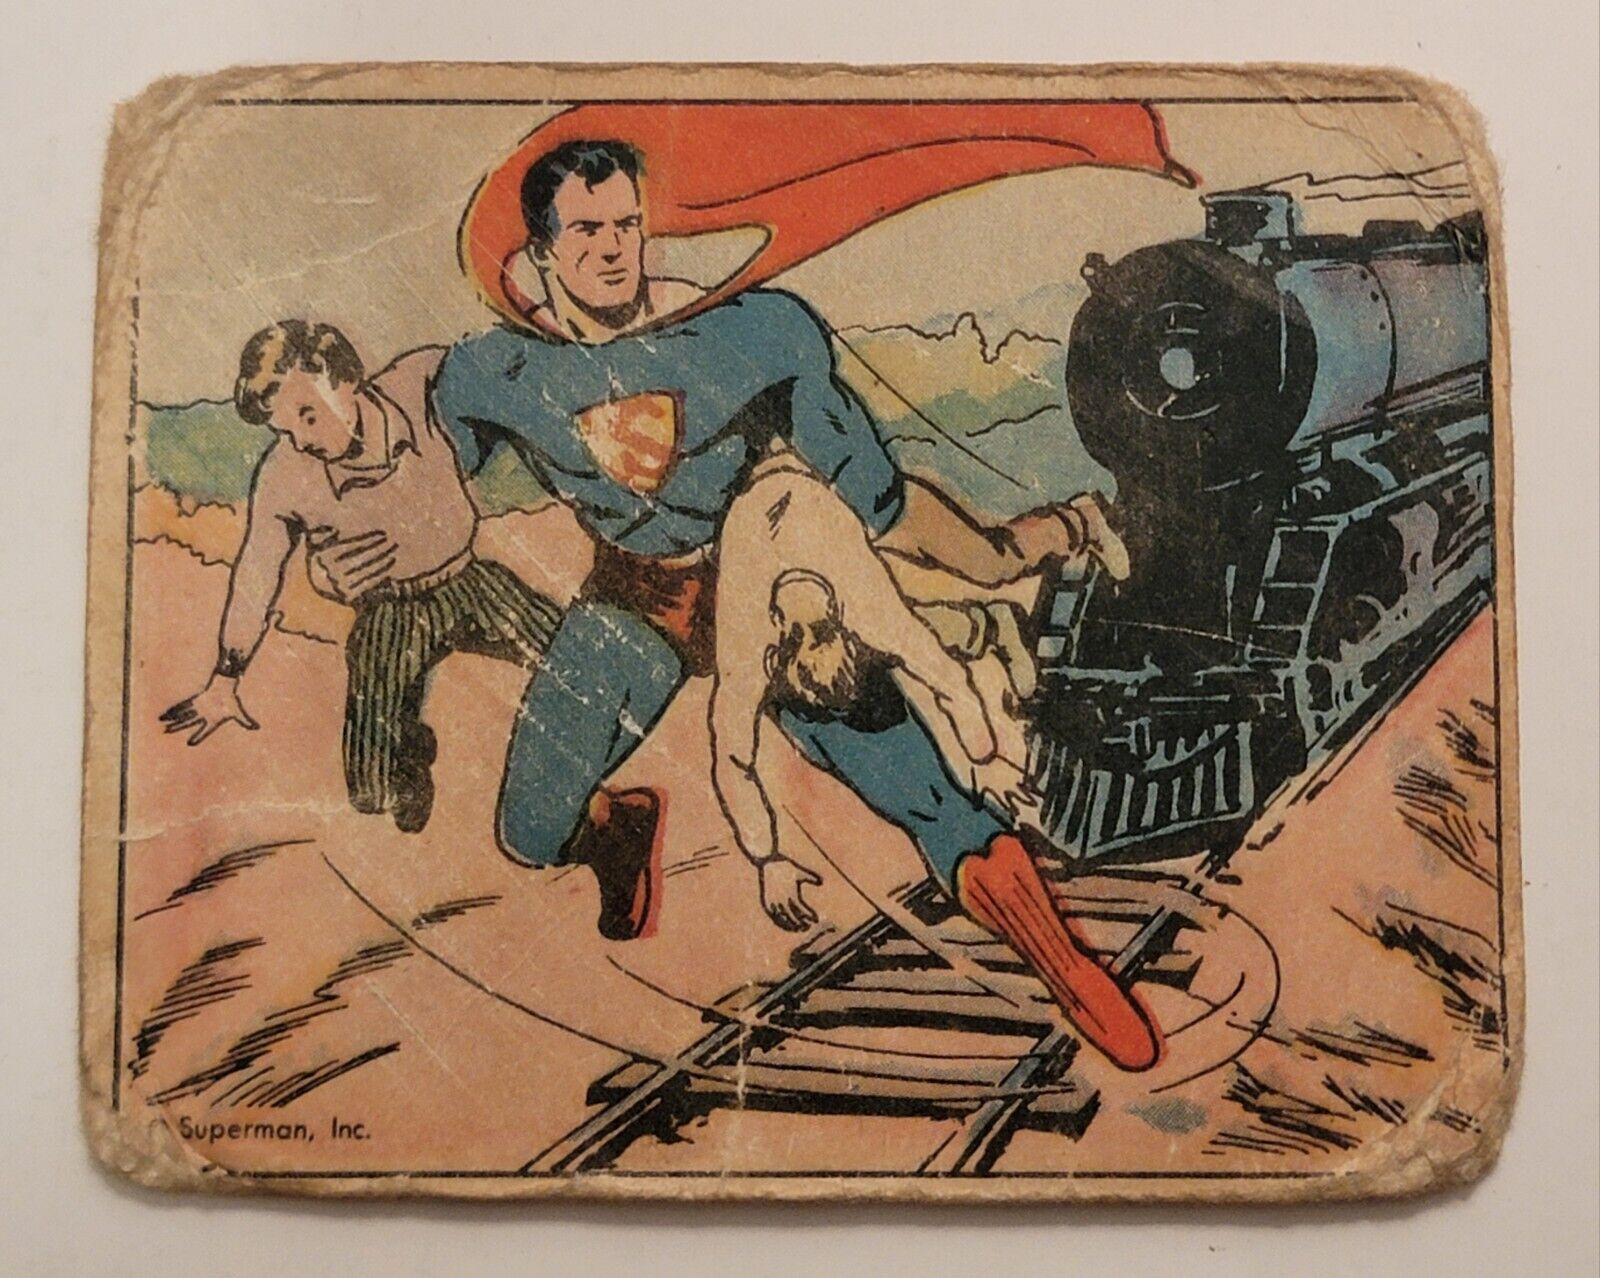 1940 SUPERMAN GUM CARD #3 From The Jaws Of Death Vintage Gum, Inc. Scarce 1.5 FR